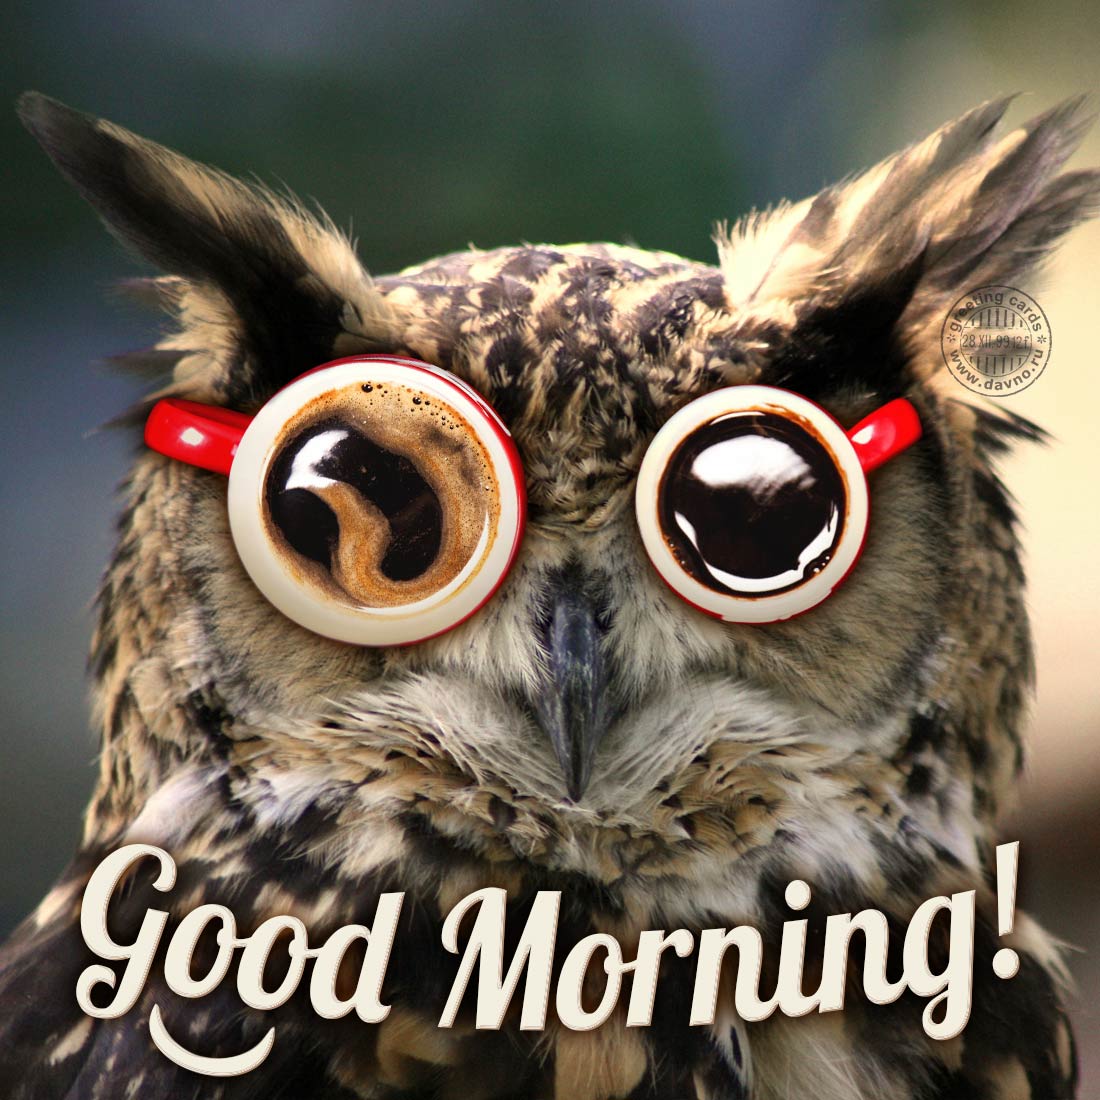 Funny Good Morning Owl Picture - Download on Davno